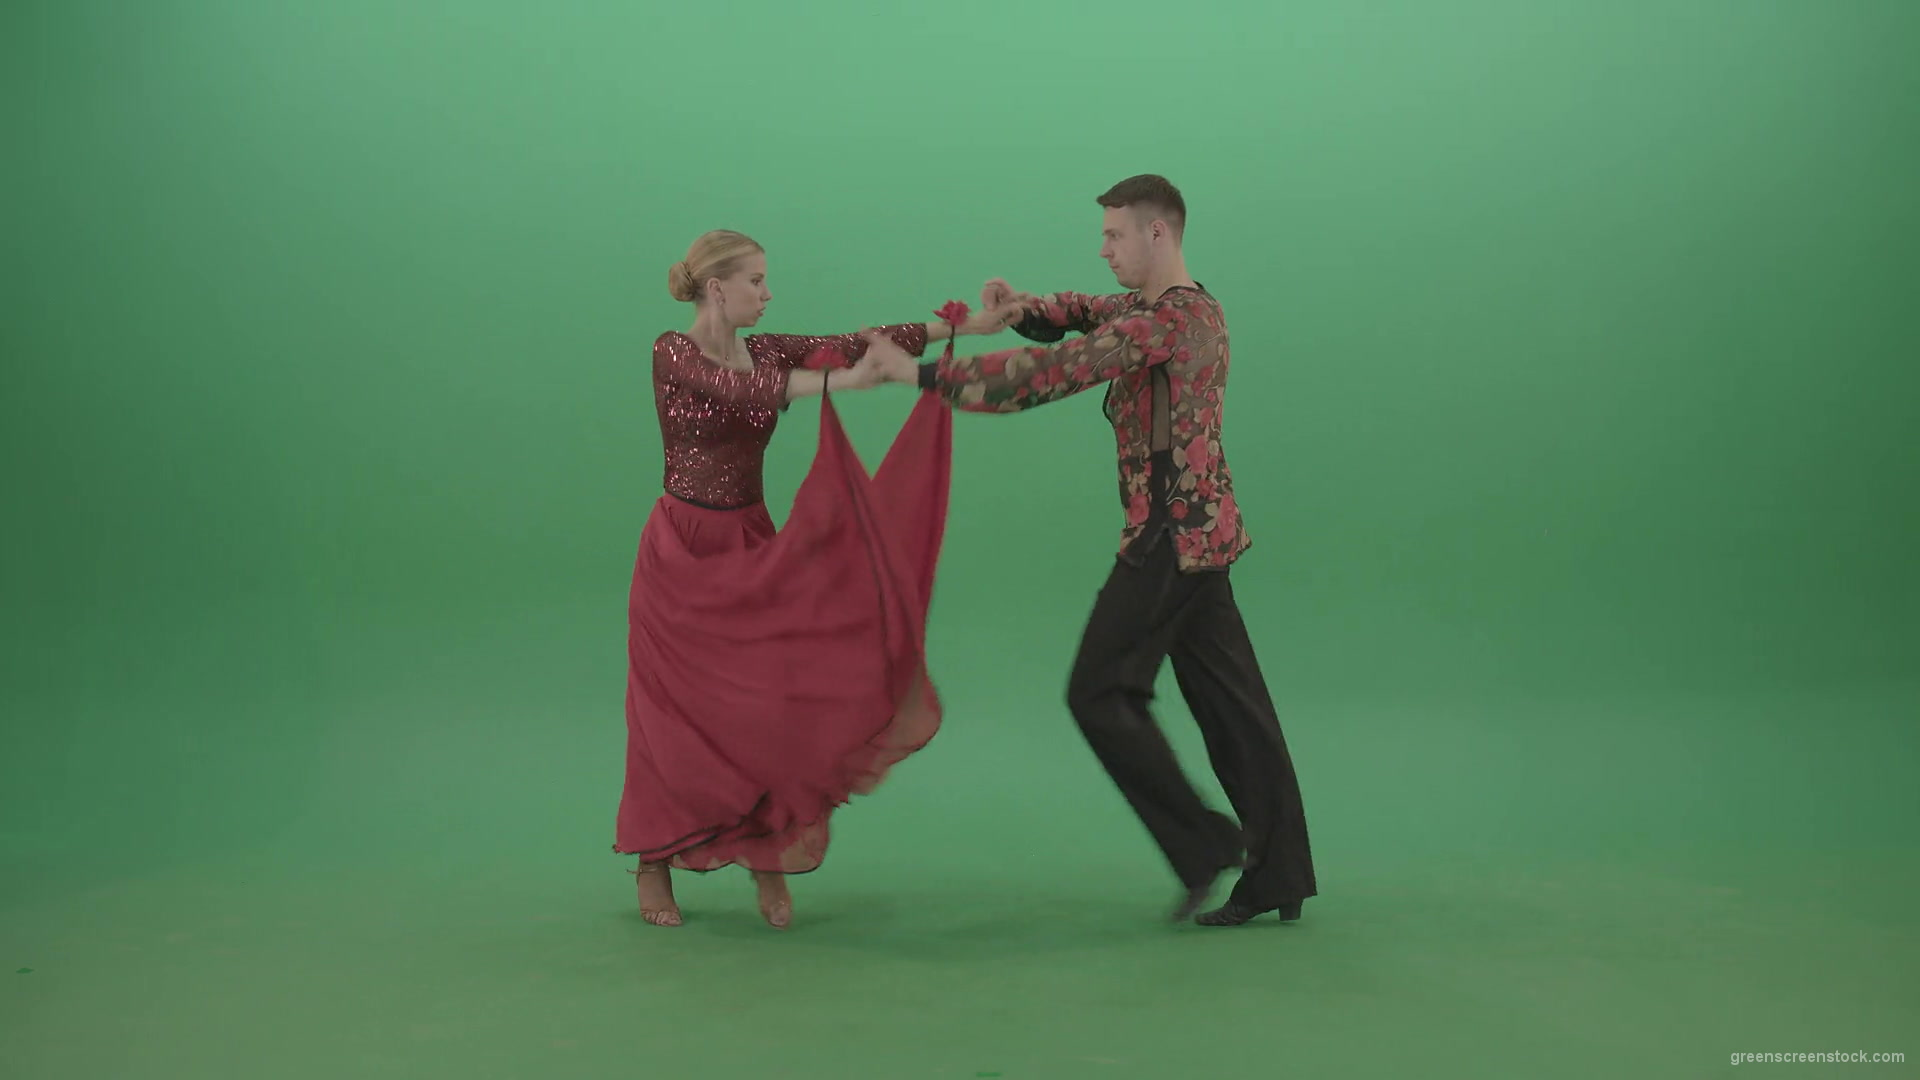 Passion-Couple-dancing-Rumba-Ballroom-dance-and-clapping-in-hands-isolated-on-green-screen-4K-Video-Footage-1920_008 Green Screen Stock